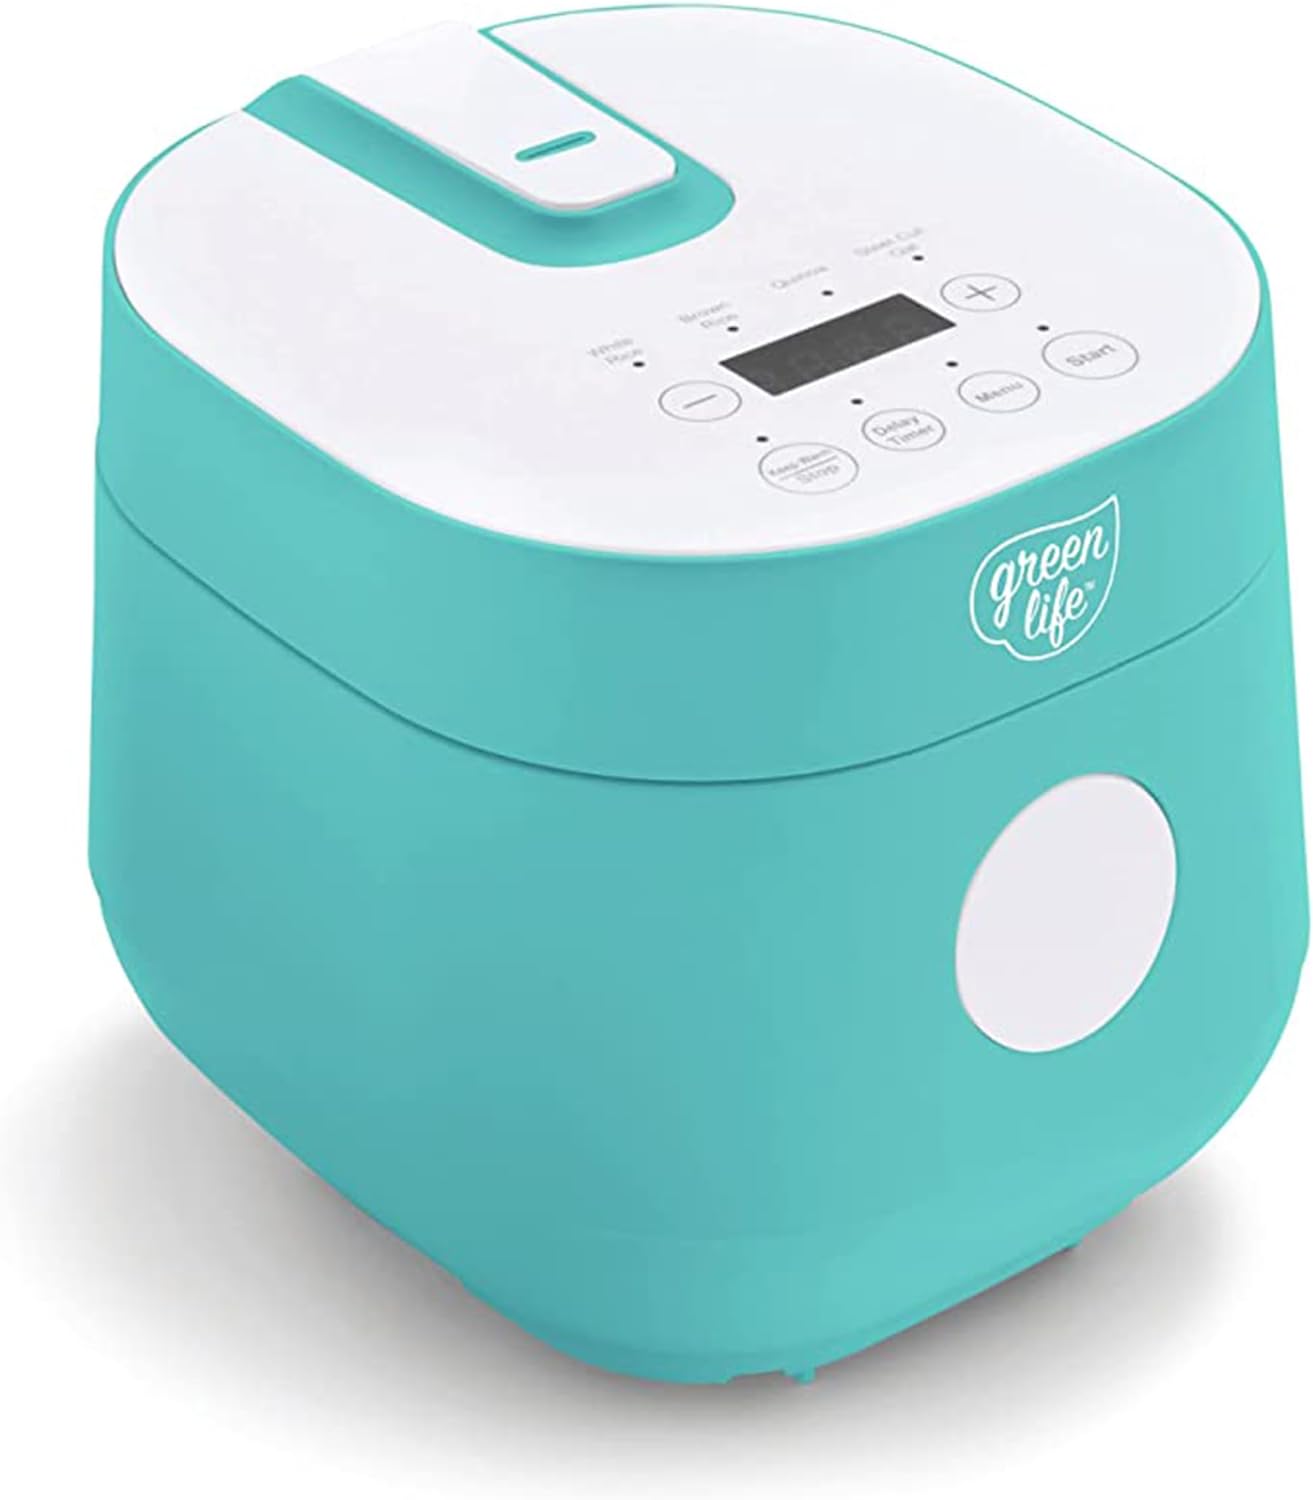 GreenLife-Healthy-Ceramic-Rice-Cooker